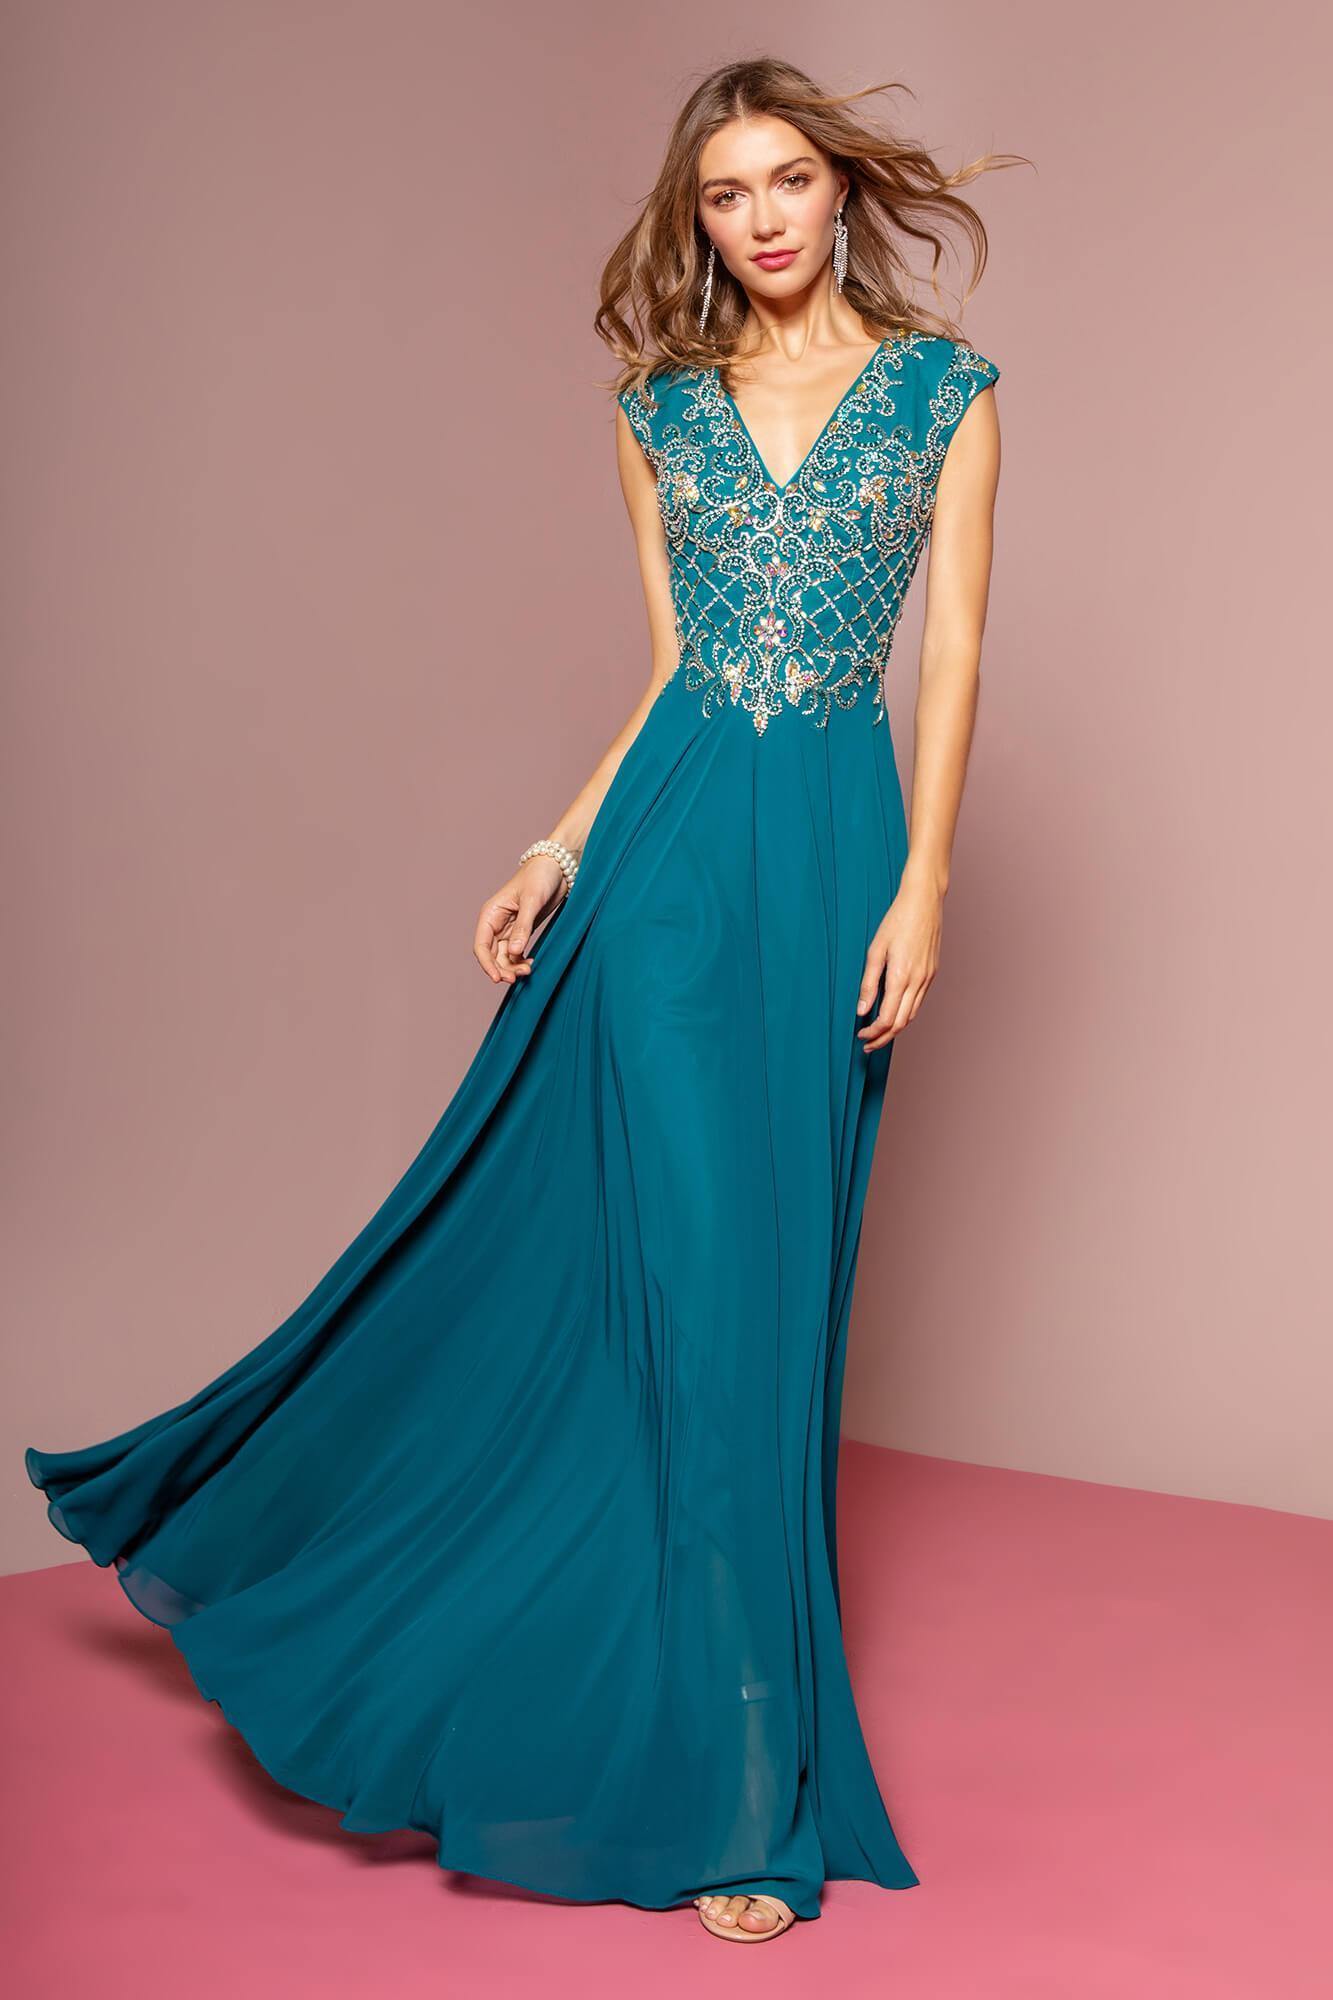 Cap Sleeve Long Prom Dress Sale - The Dress Outlet